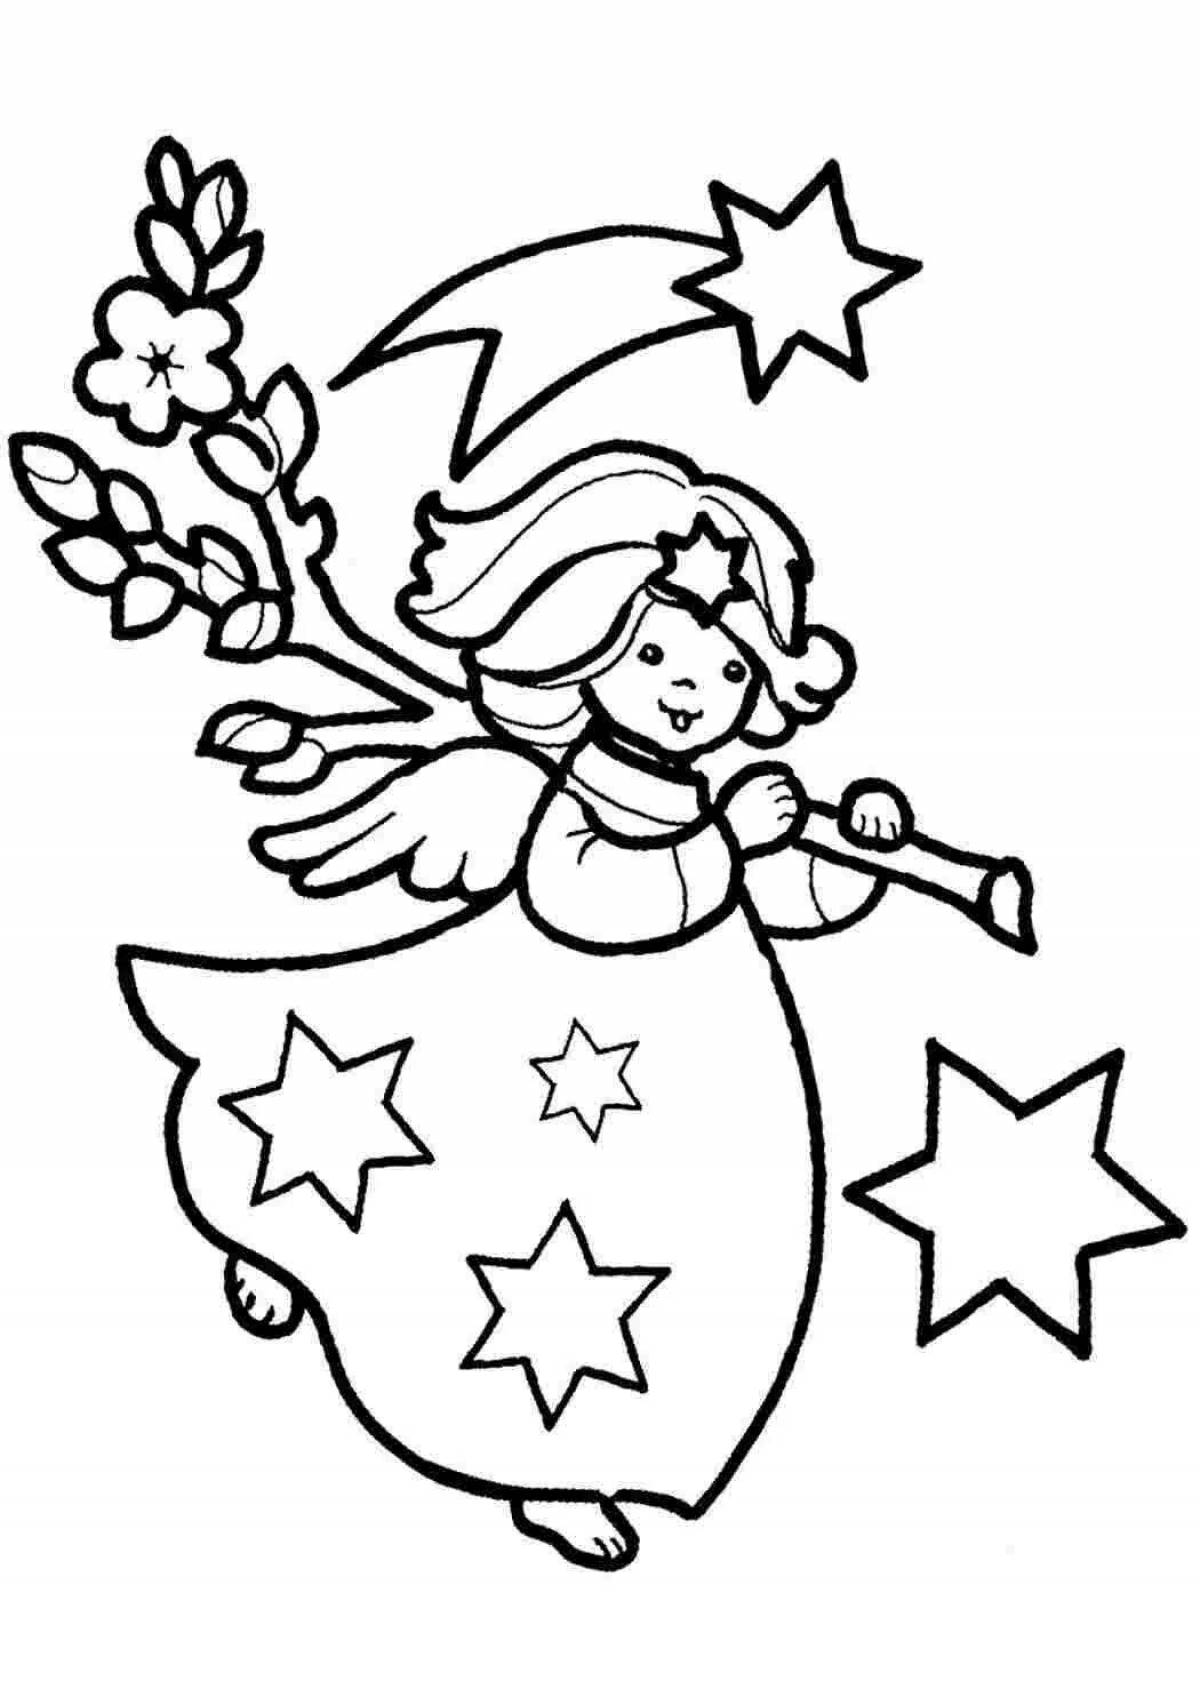 Coloring book heavenly Christmas angels